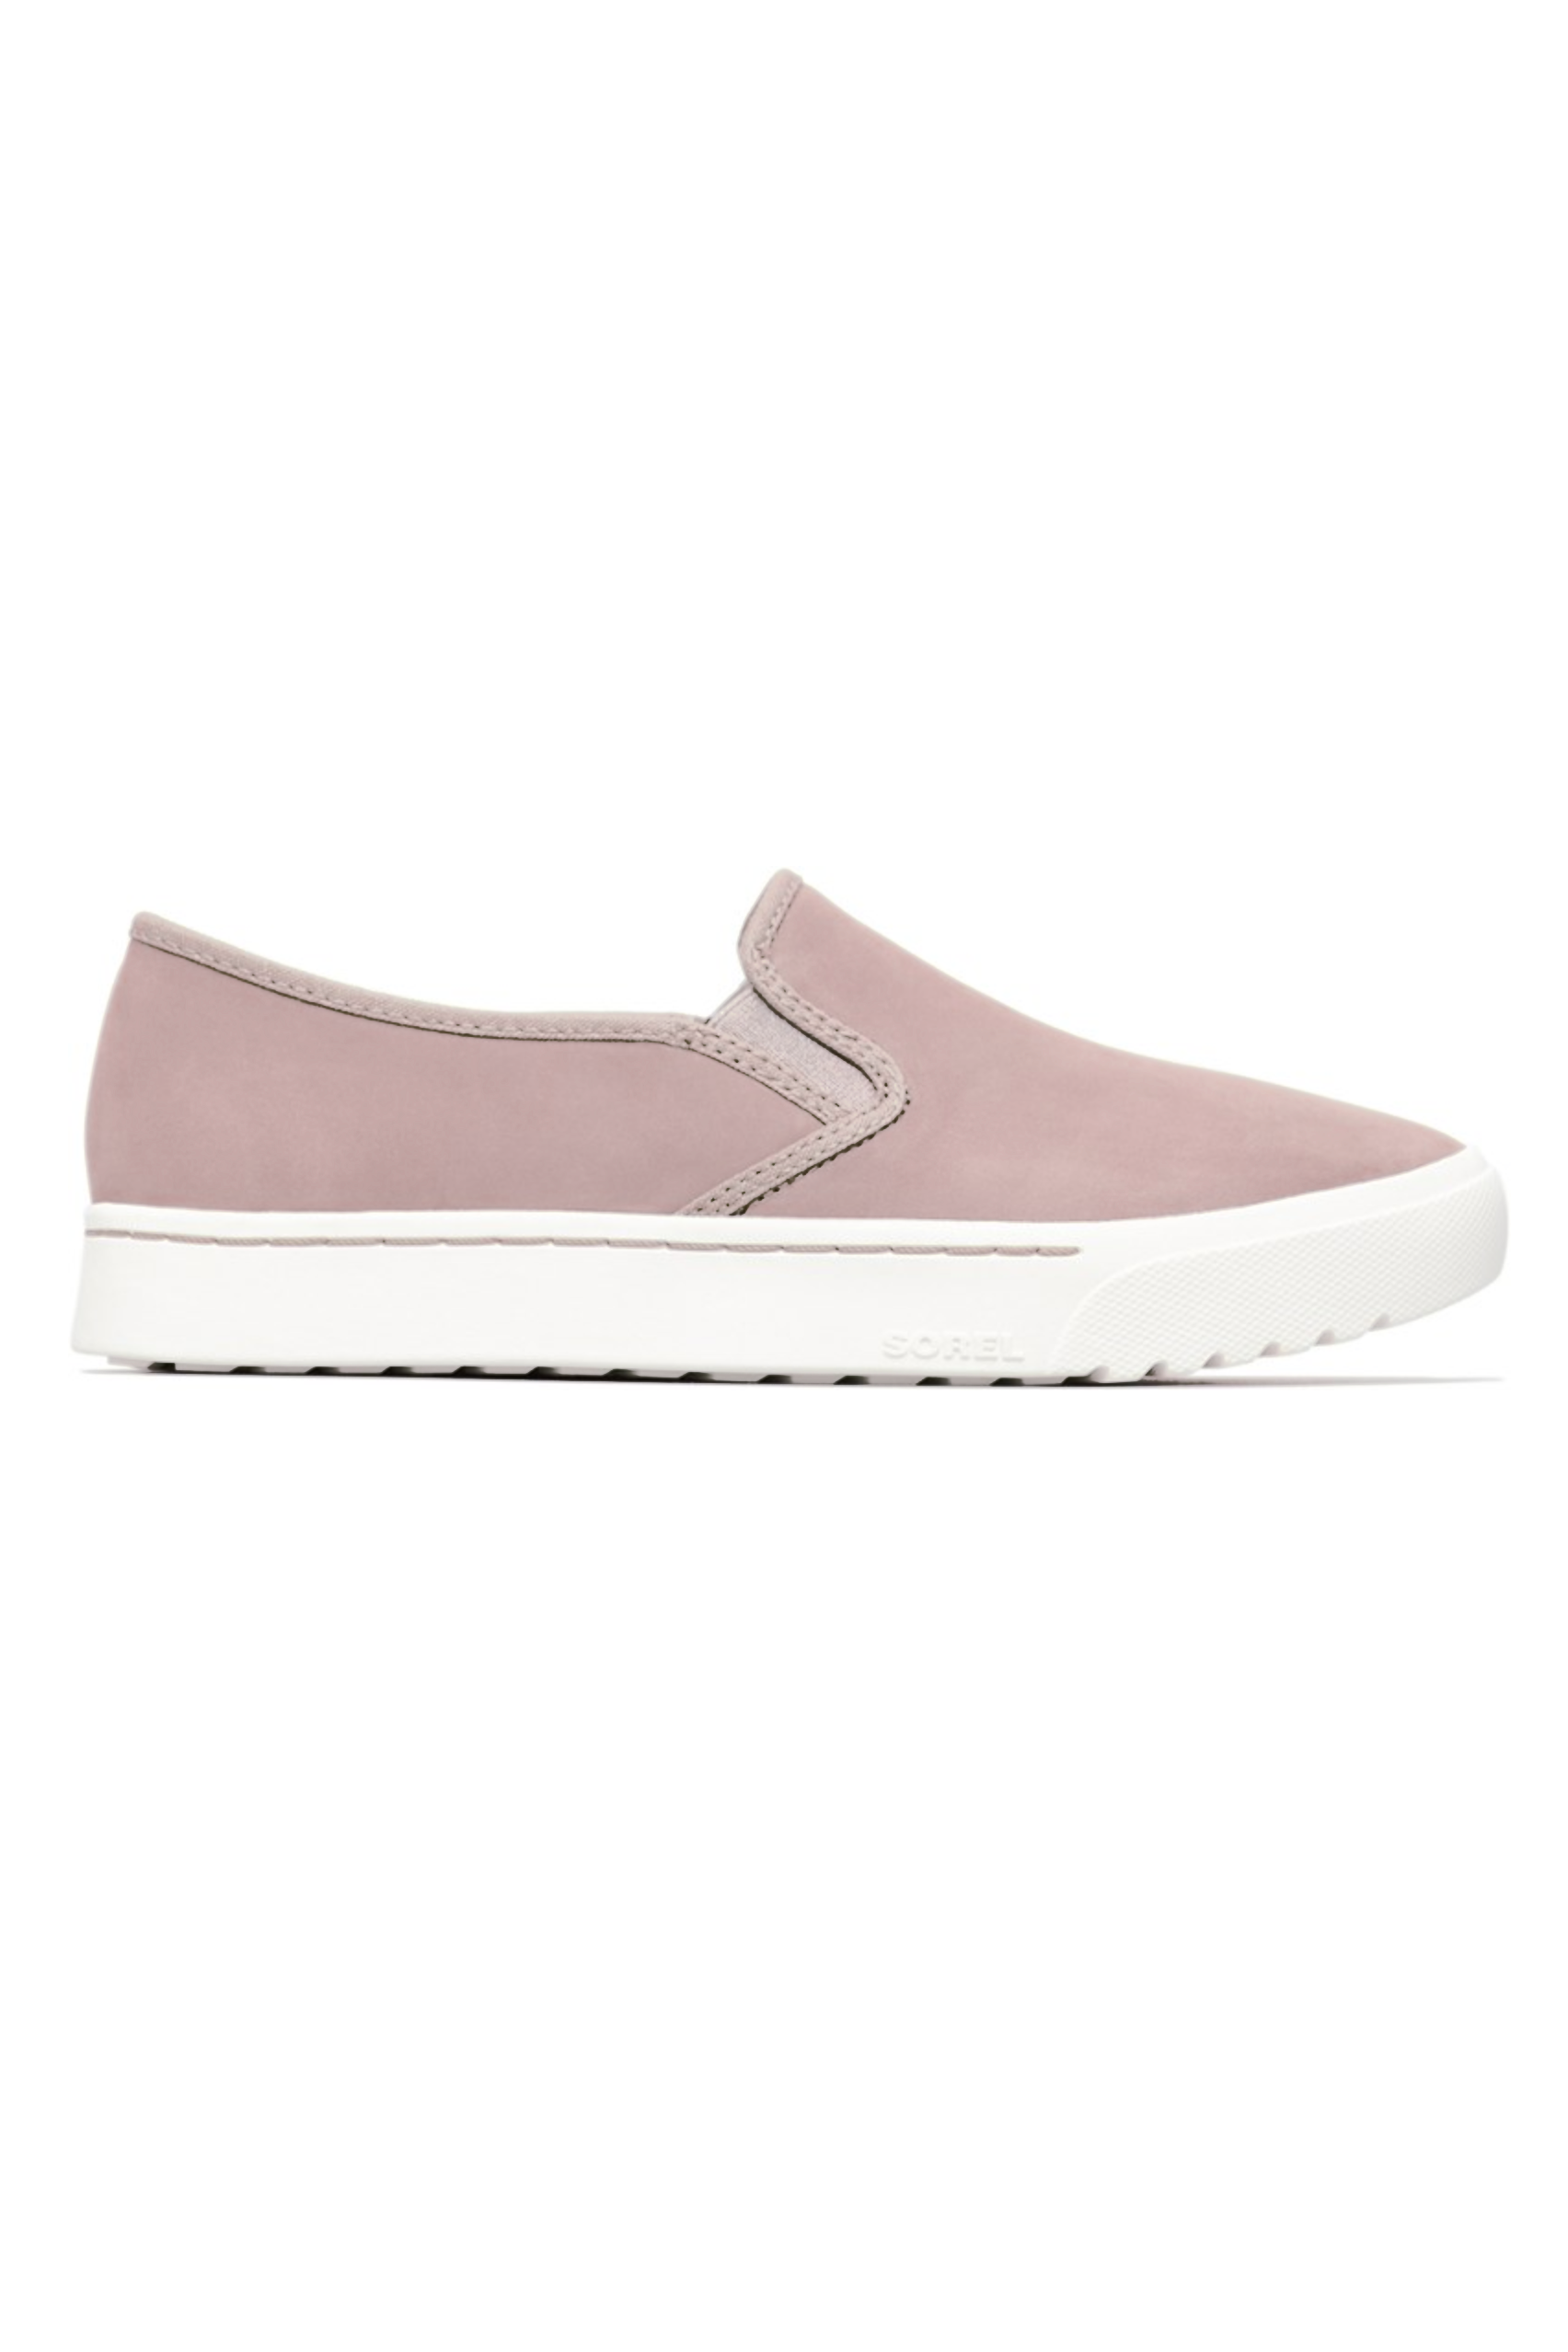 cute slip on shoes for summer